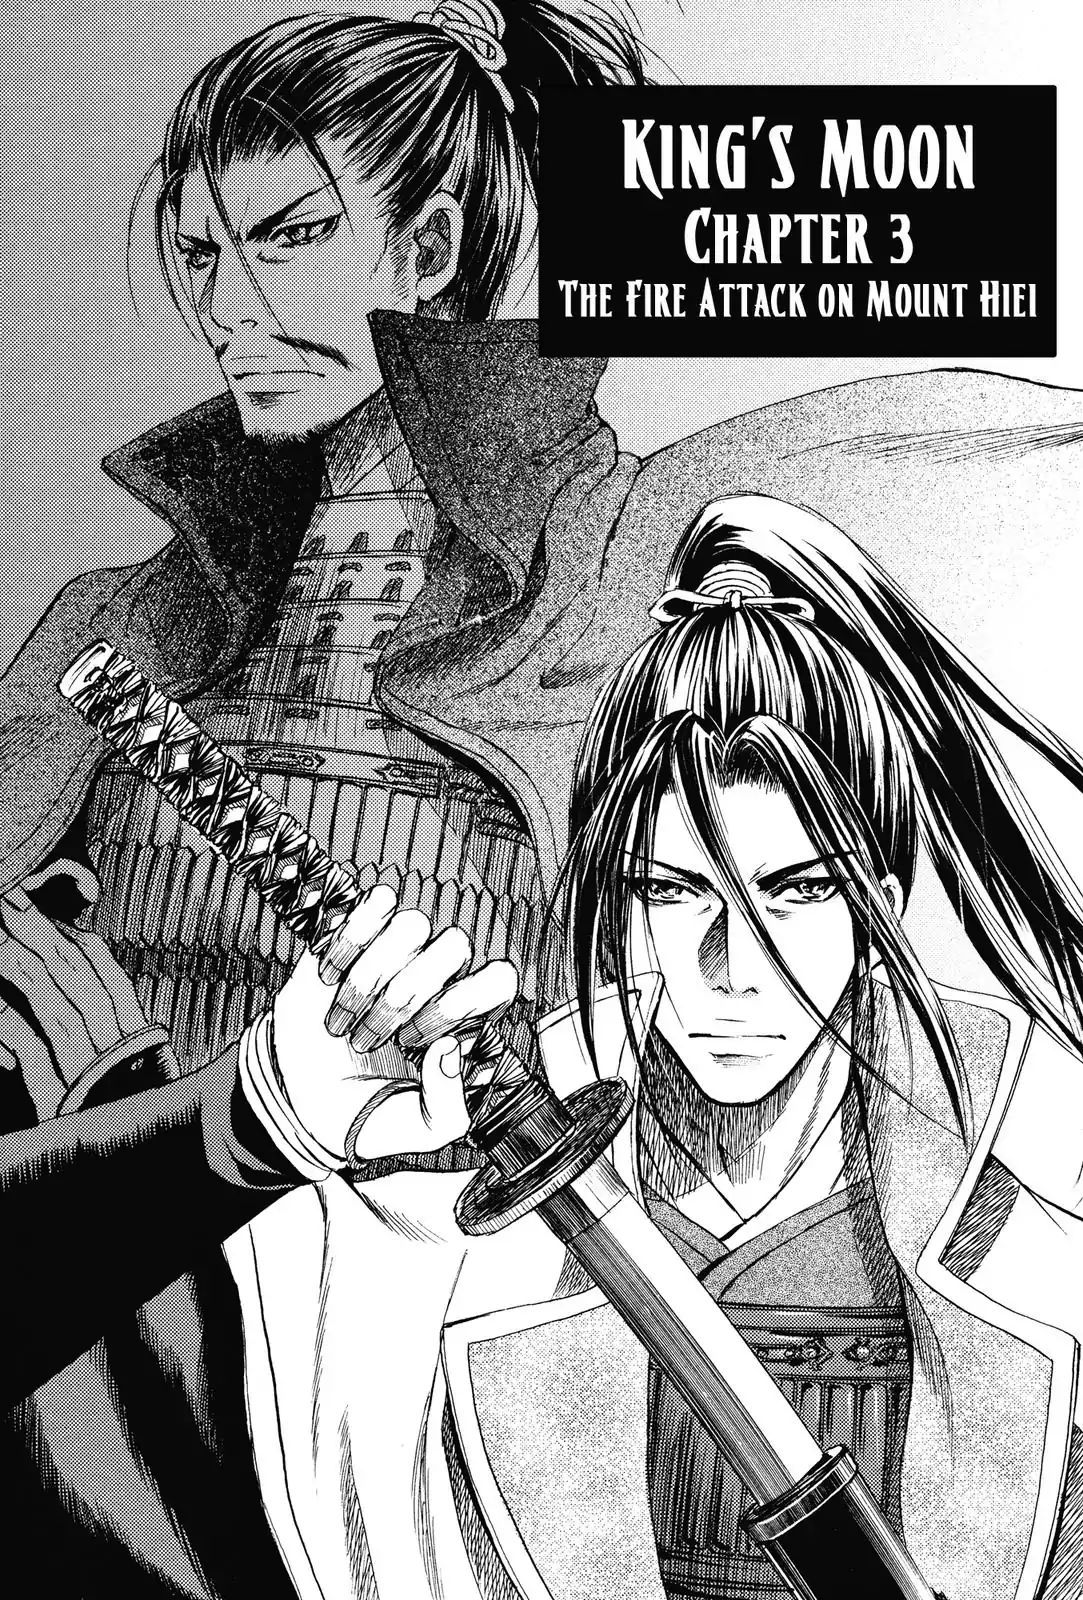 King's Moon - The Life Of Akechi Mitsuhide Chapter 3 #1